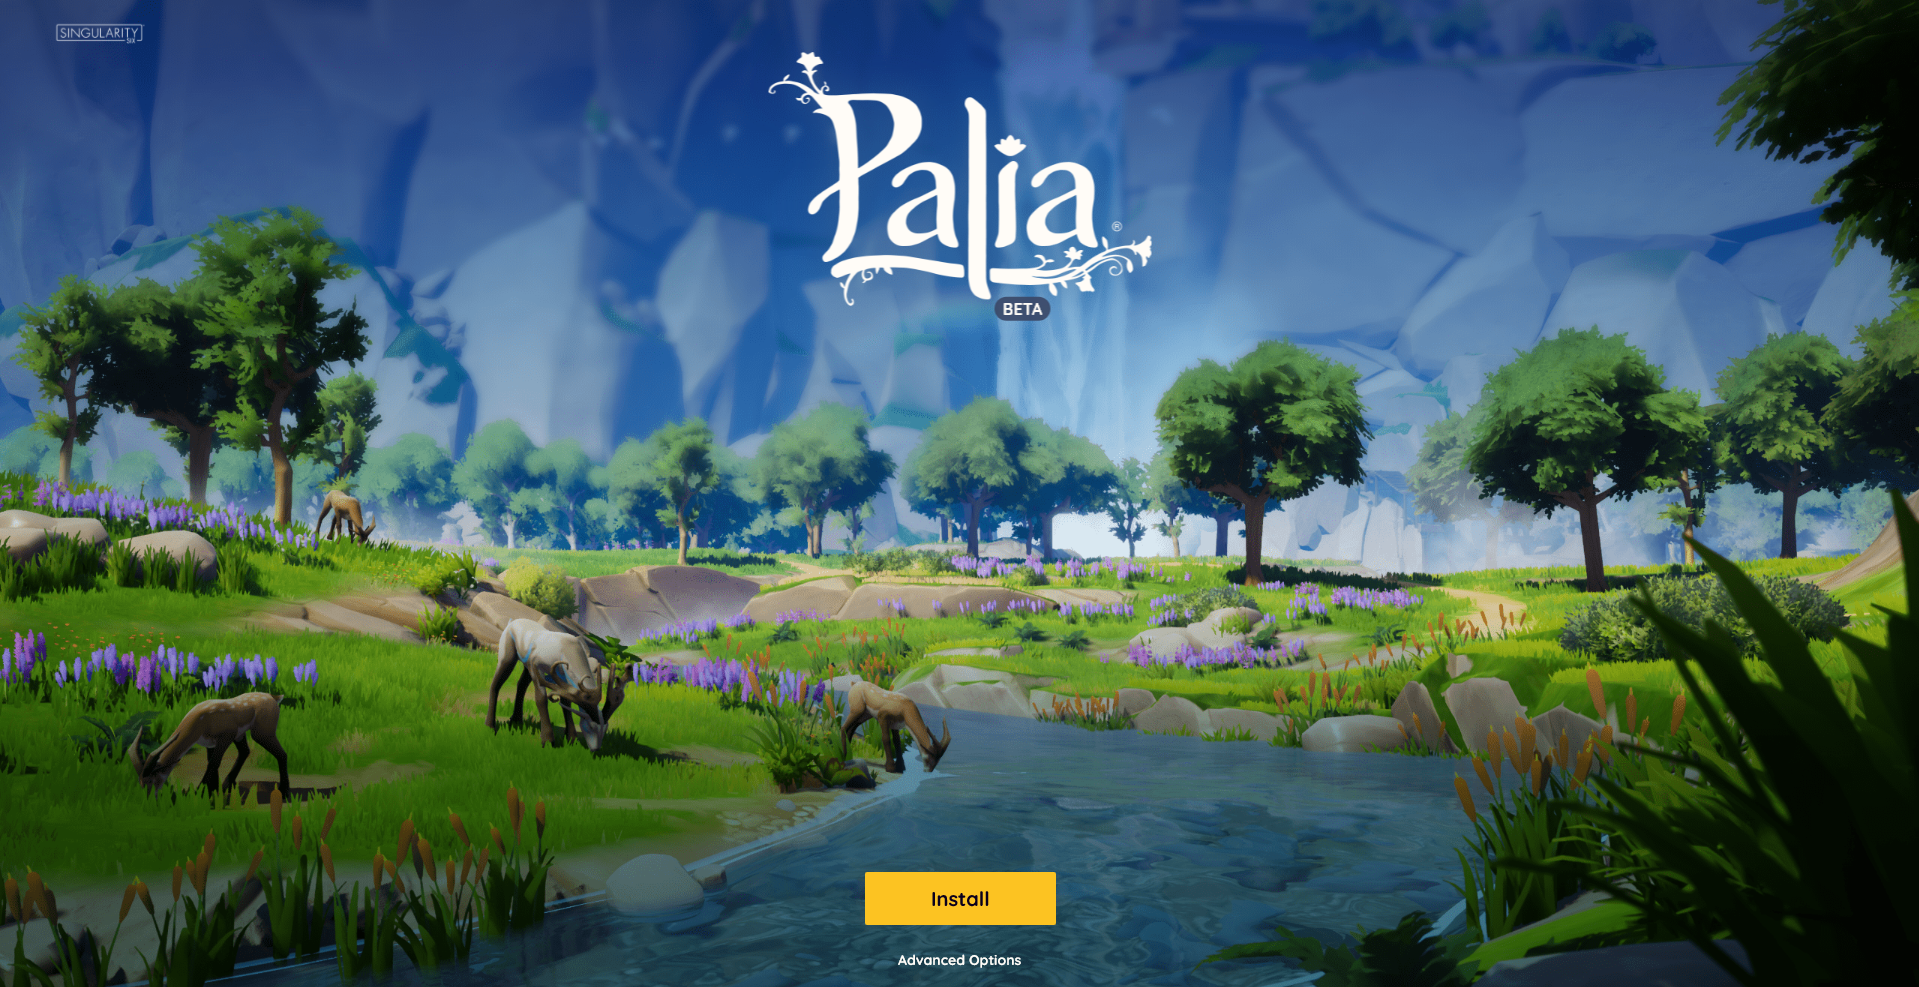 download the new version for windows Palia